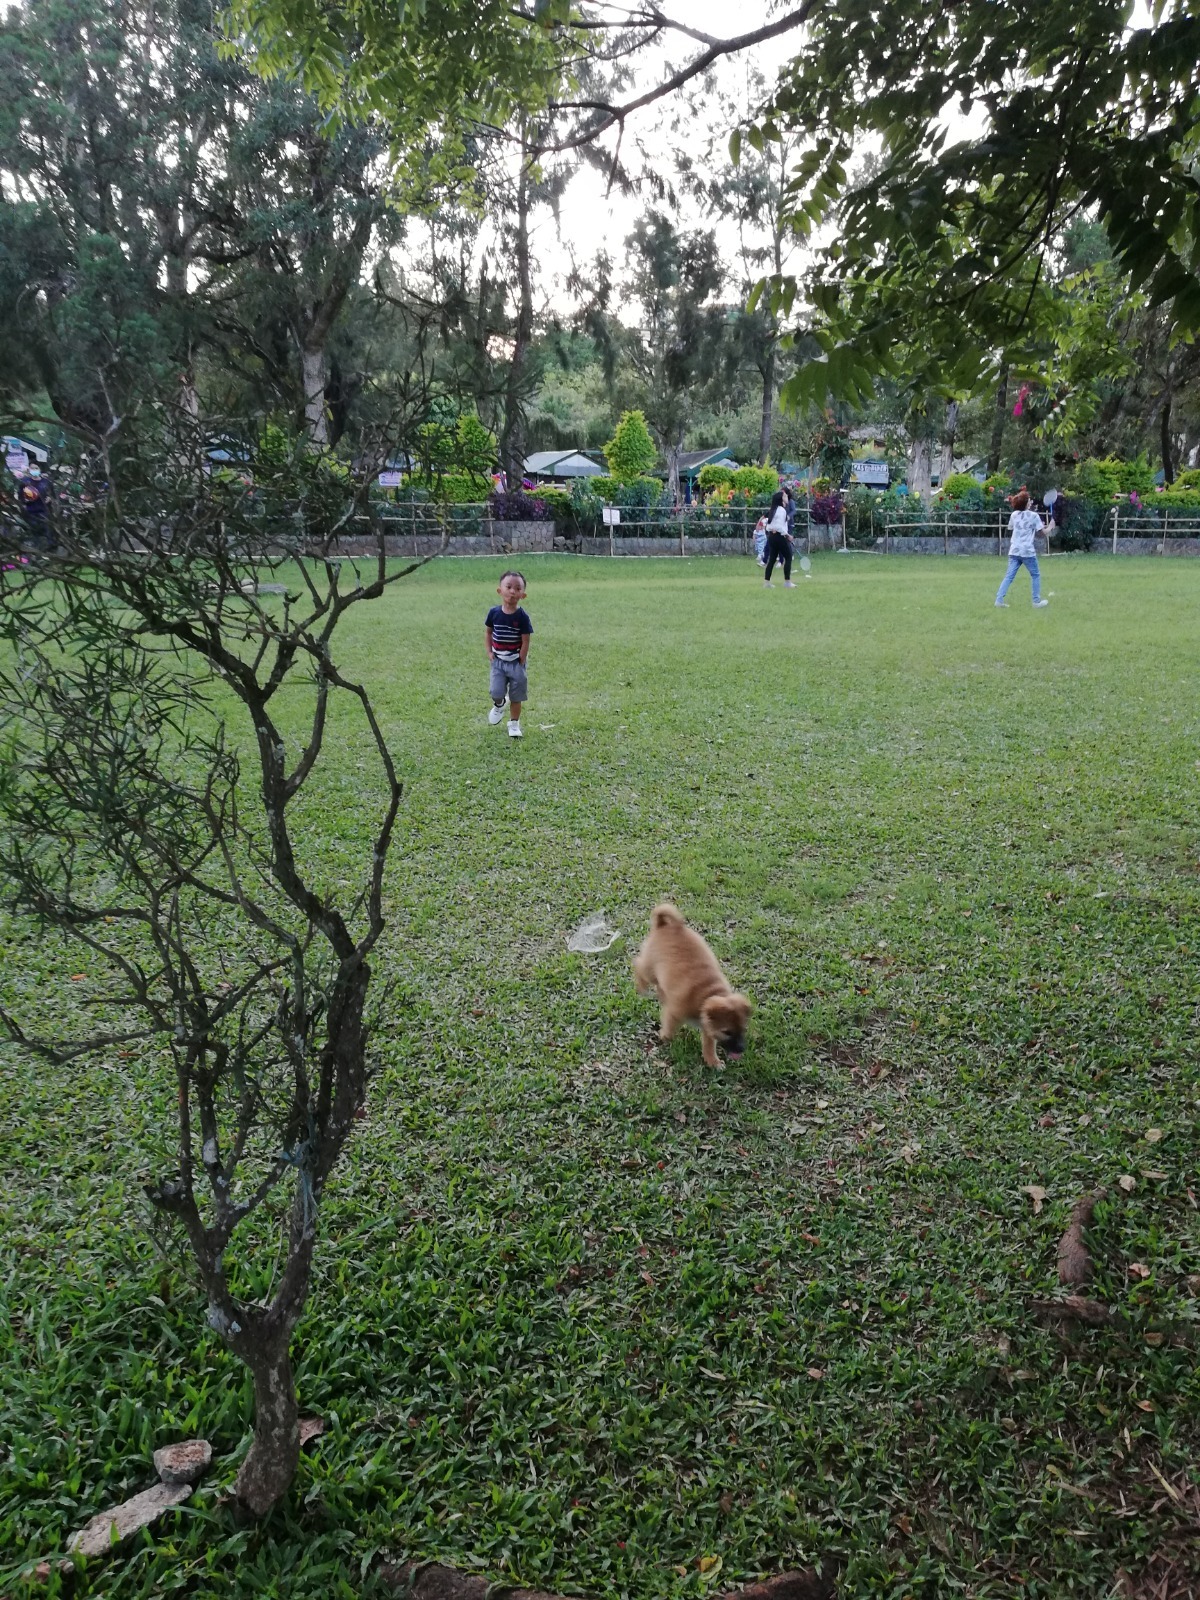 Kid play with a dog in Burnham park